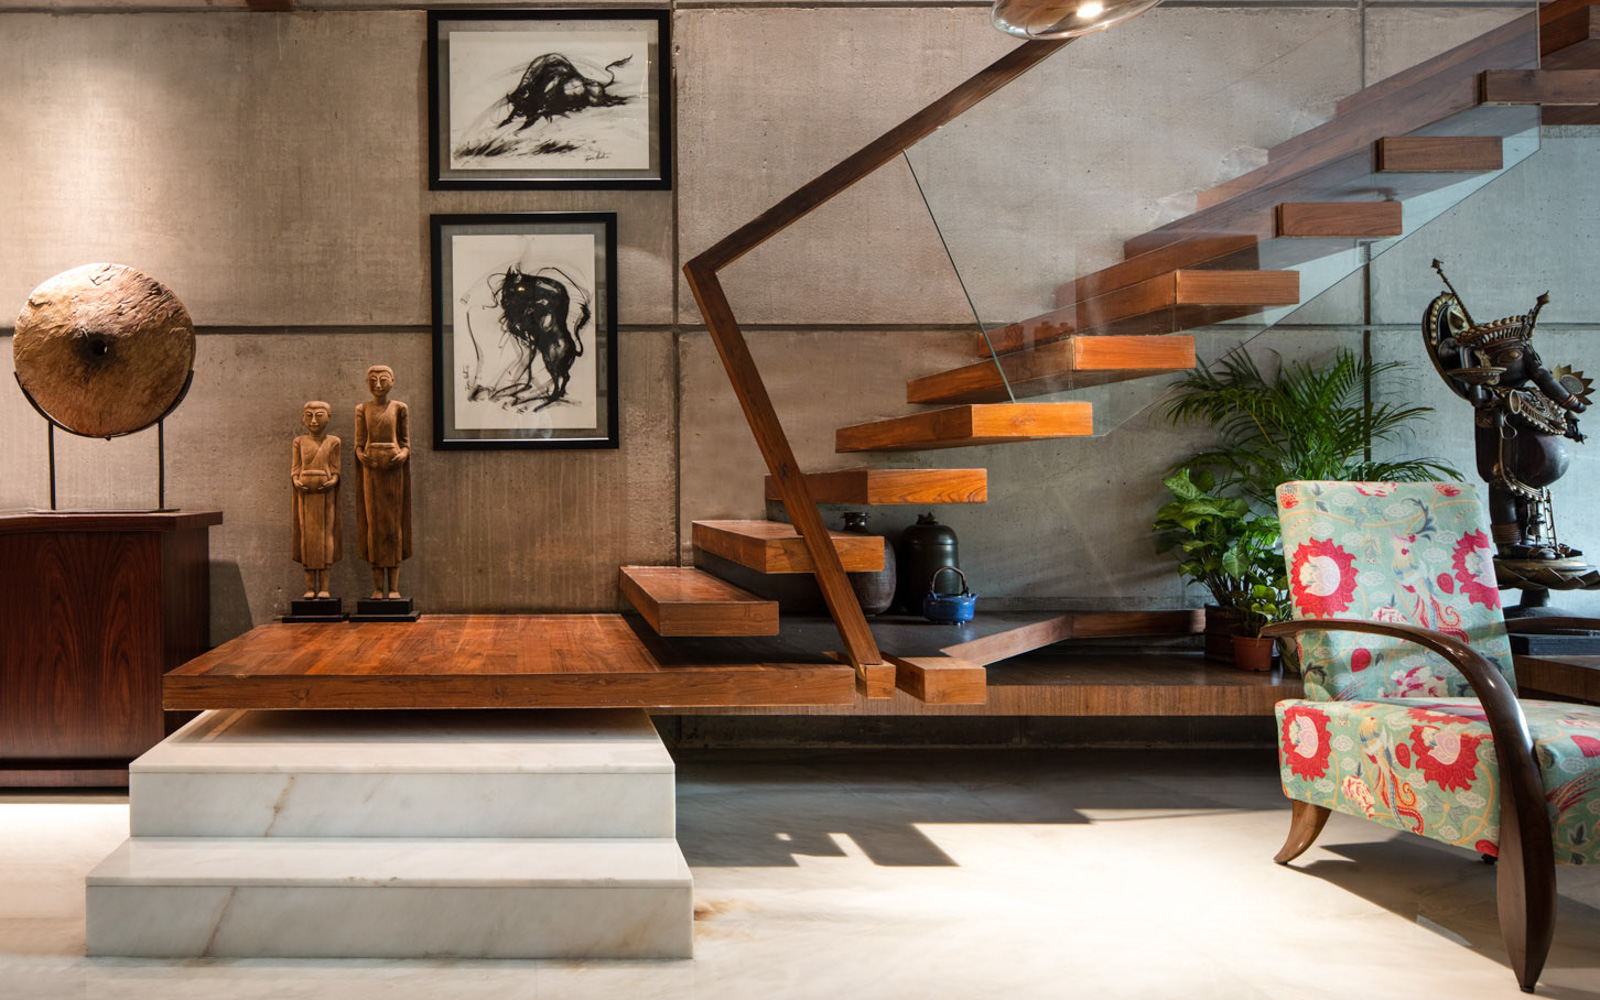 View of the staircase and wooden chakki in Amrita Guha's Delhi house